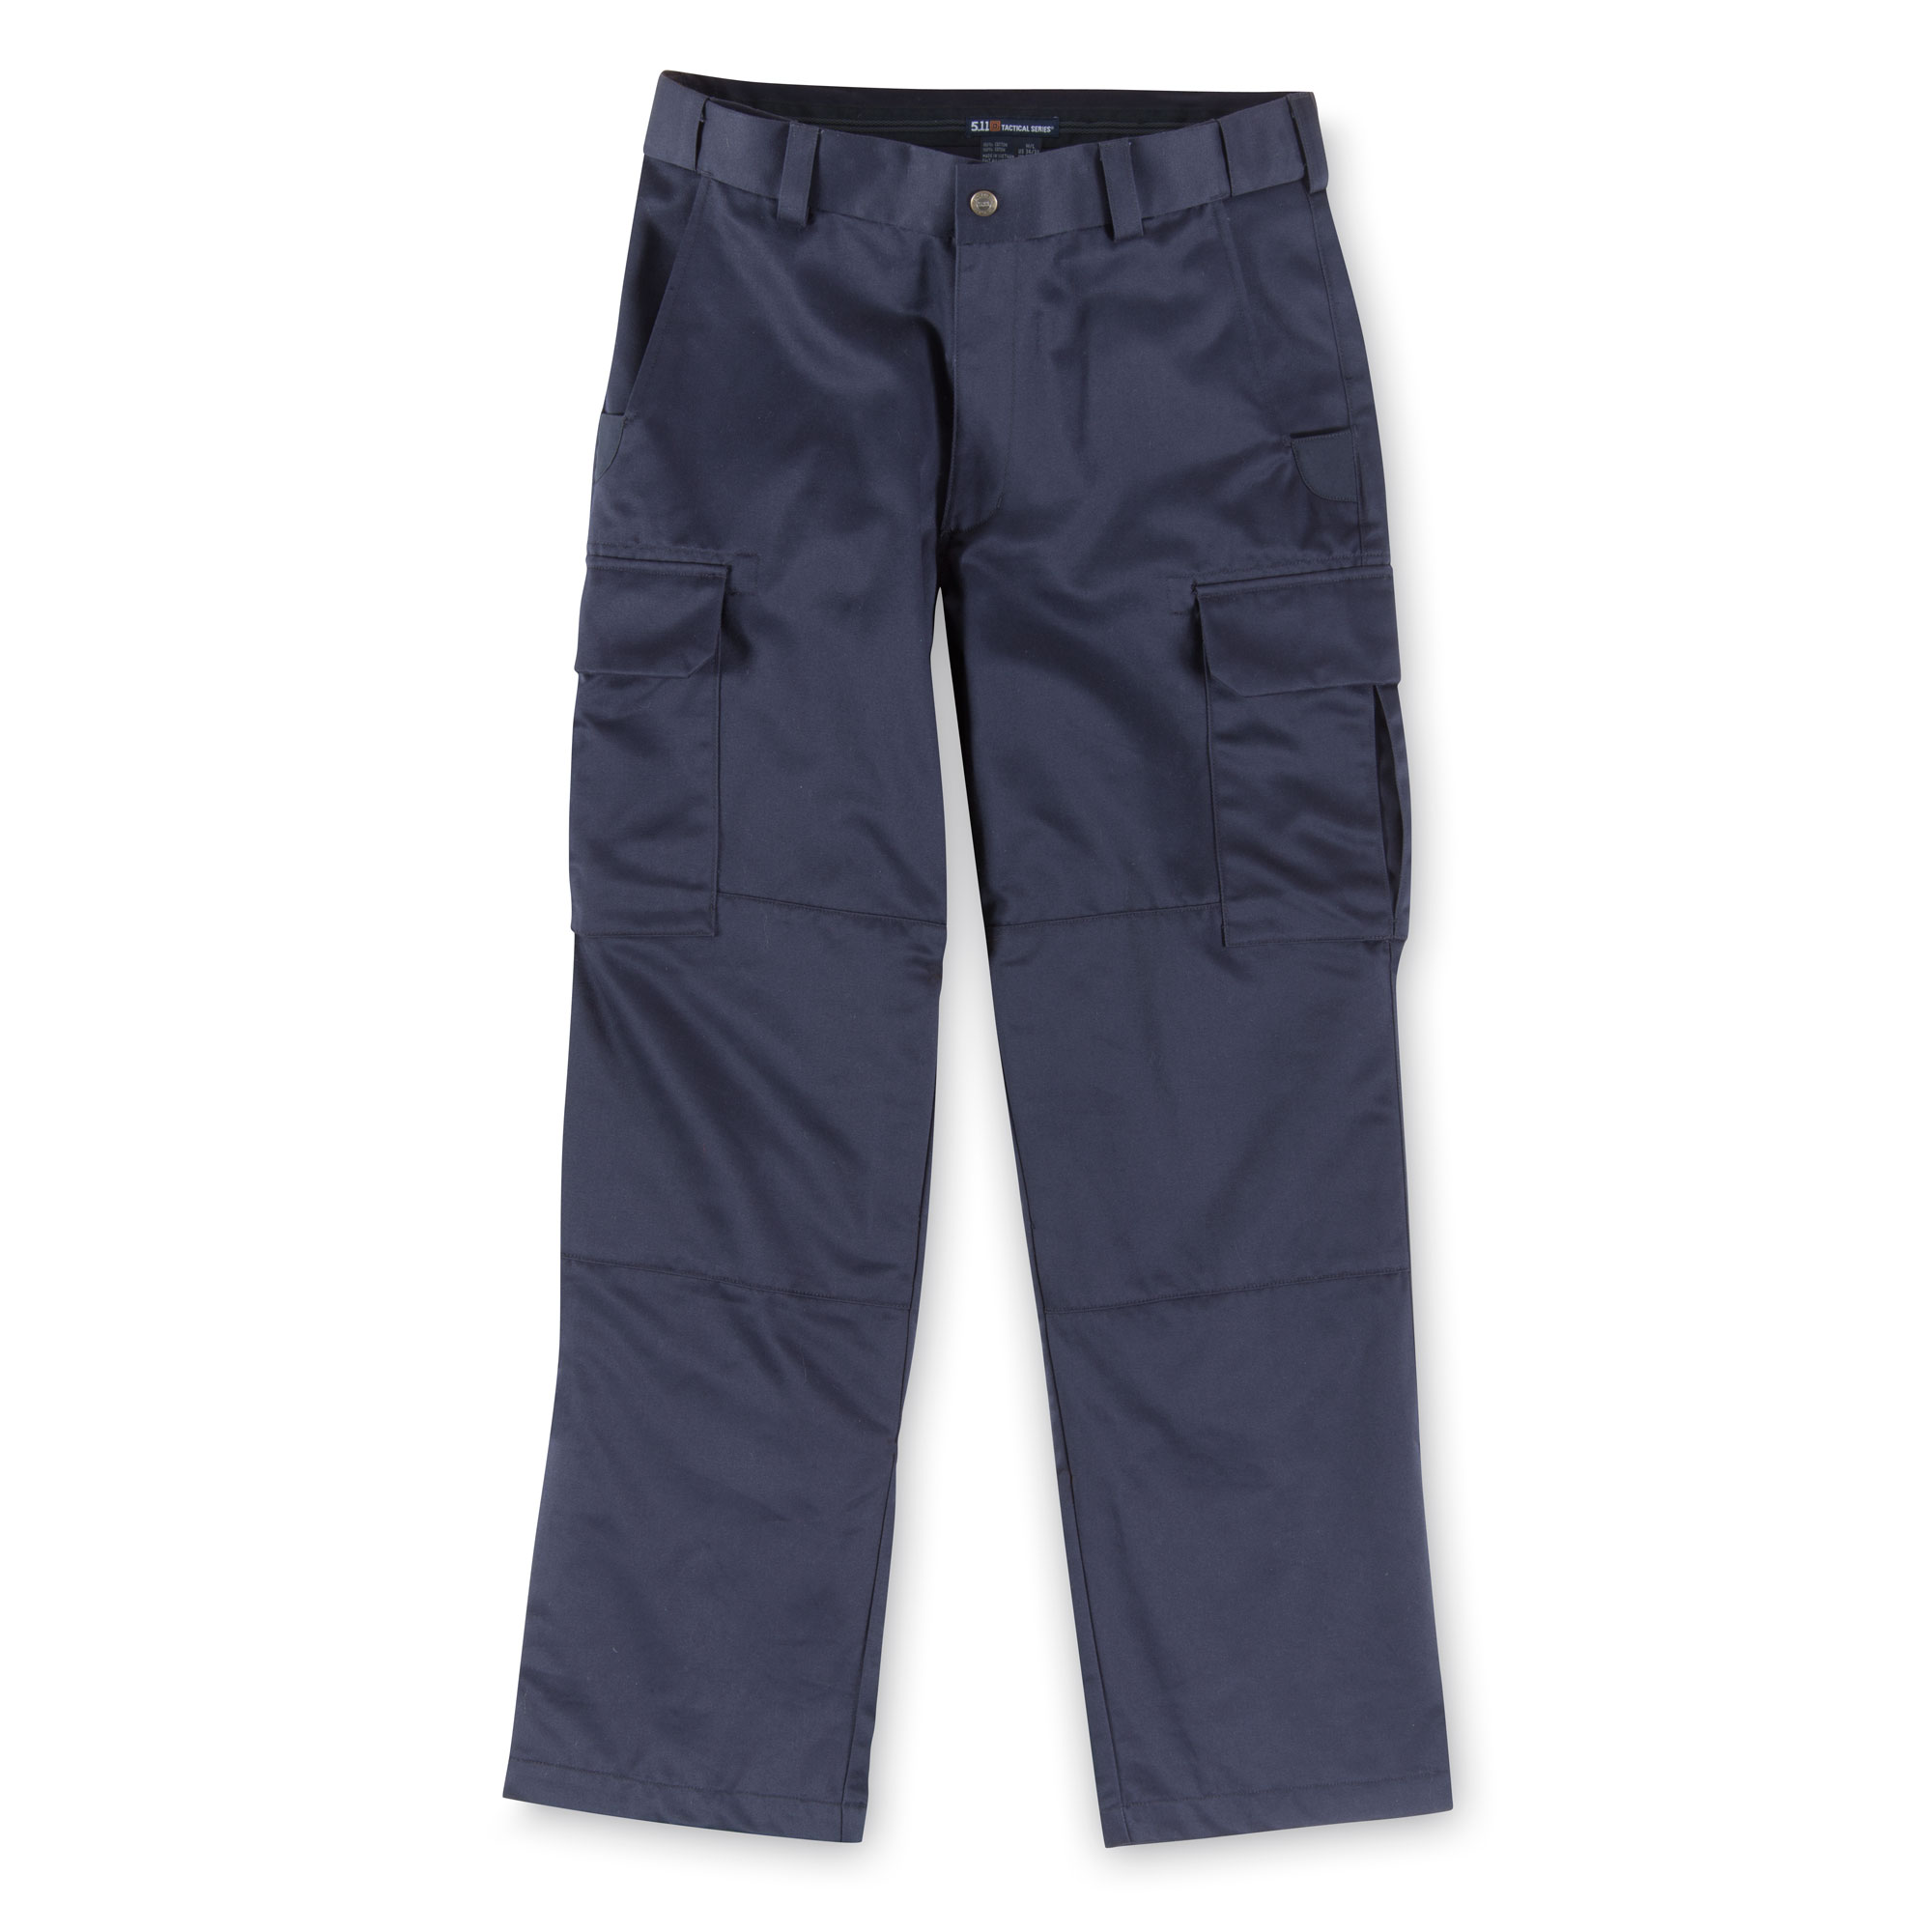 Buy 5 11 Tactical Mens Company Cargo Pant - 5.11 Tactical Online at ...